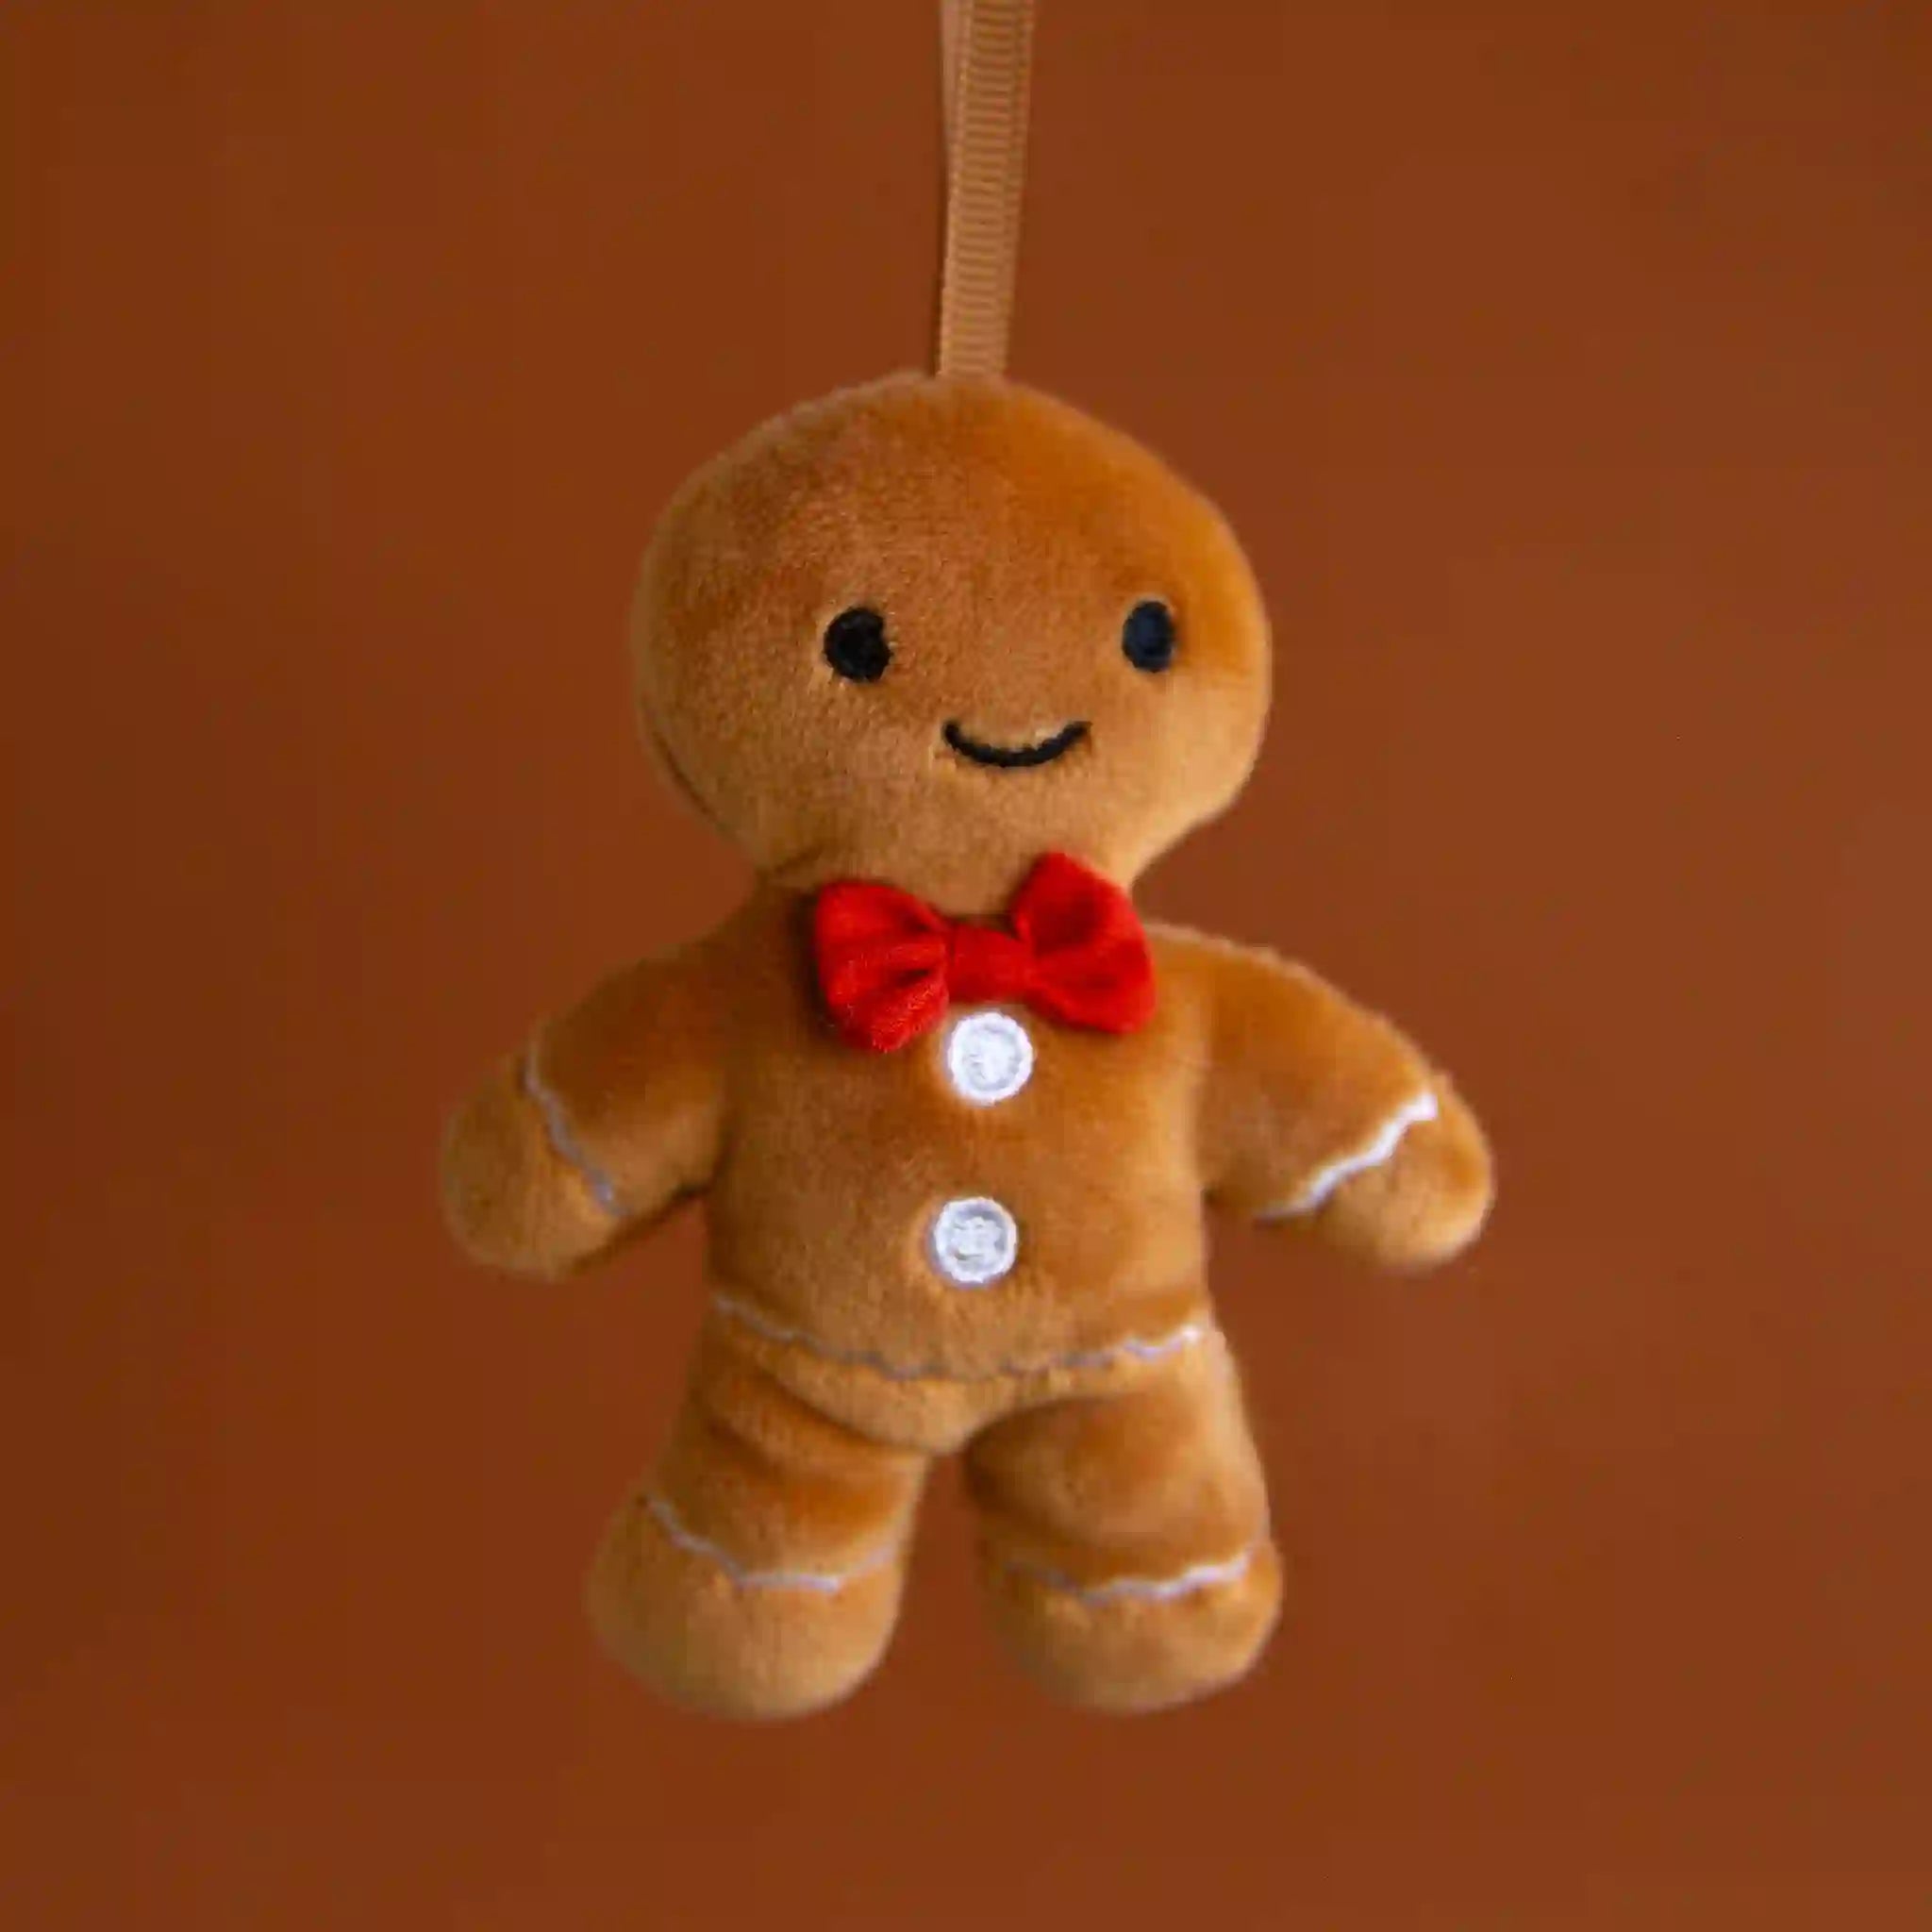 On a brown background is a stuffed toy gingerbread man with white detailing and a red bowtie.